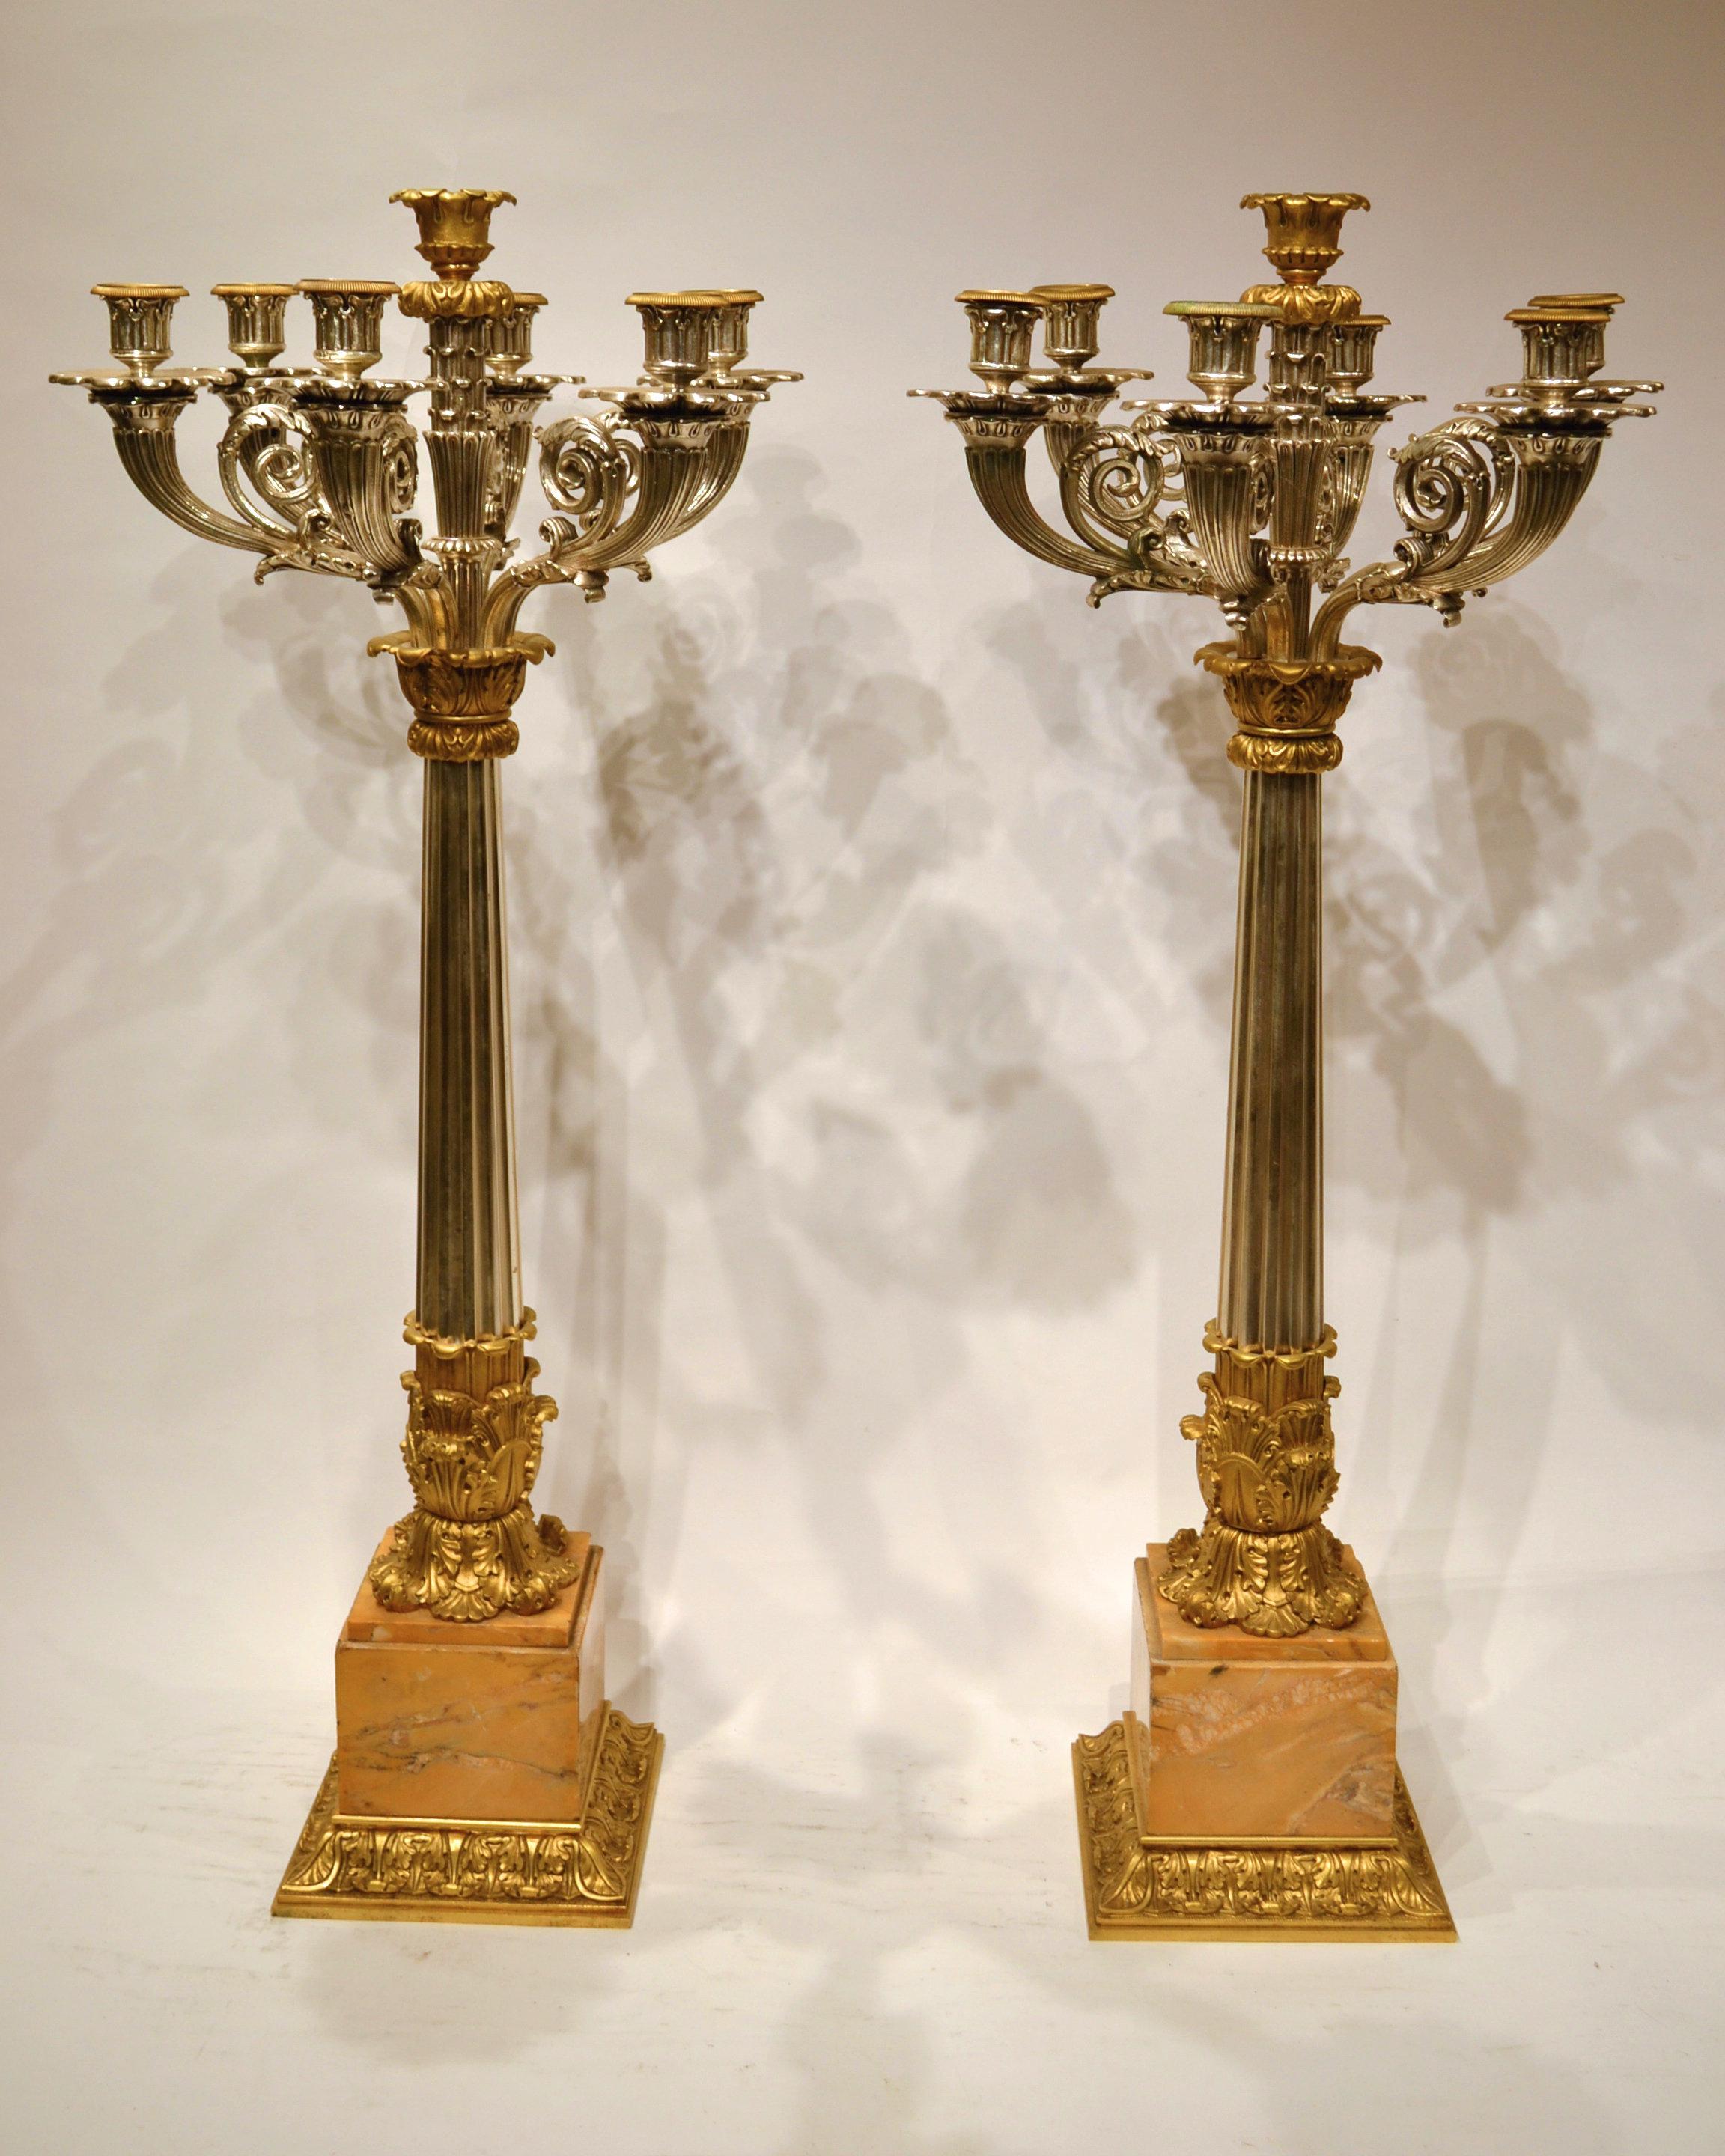 Pair of very large French 19th century Empire style silvered and gilt bronze candelabra with marble bases.